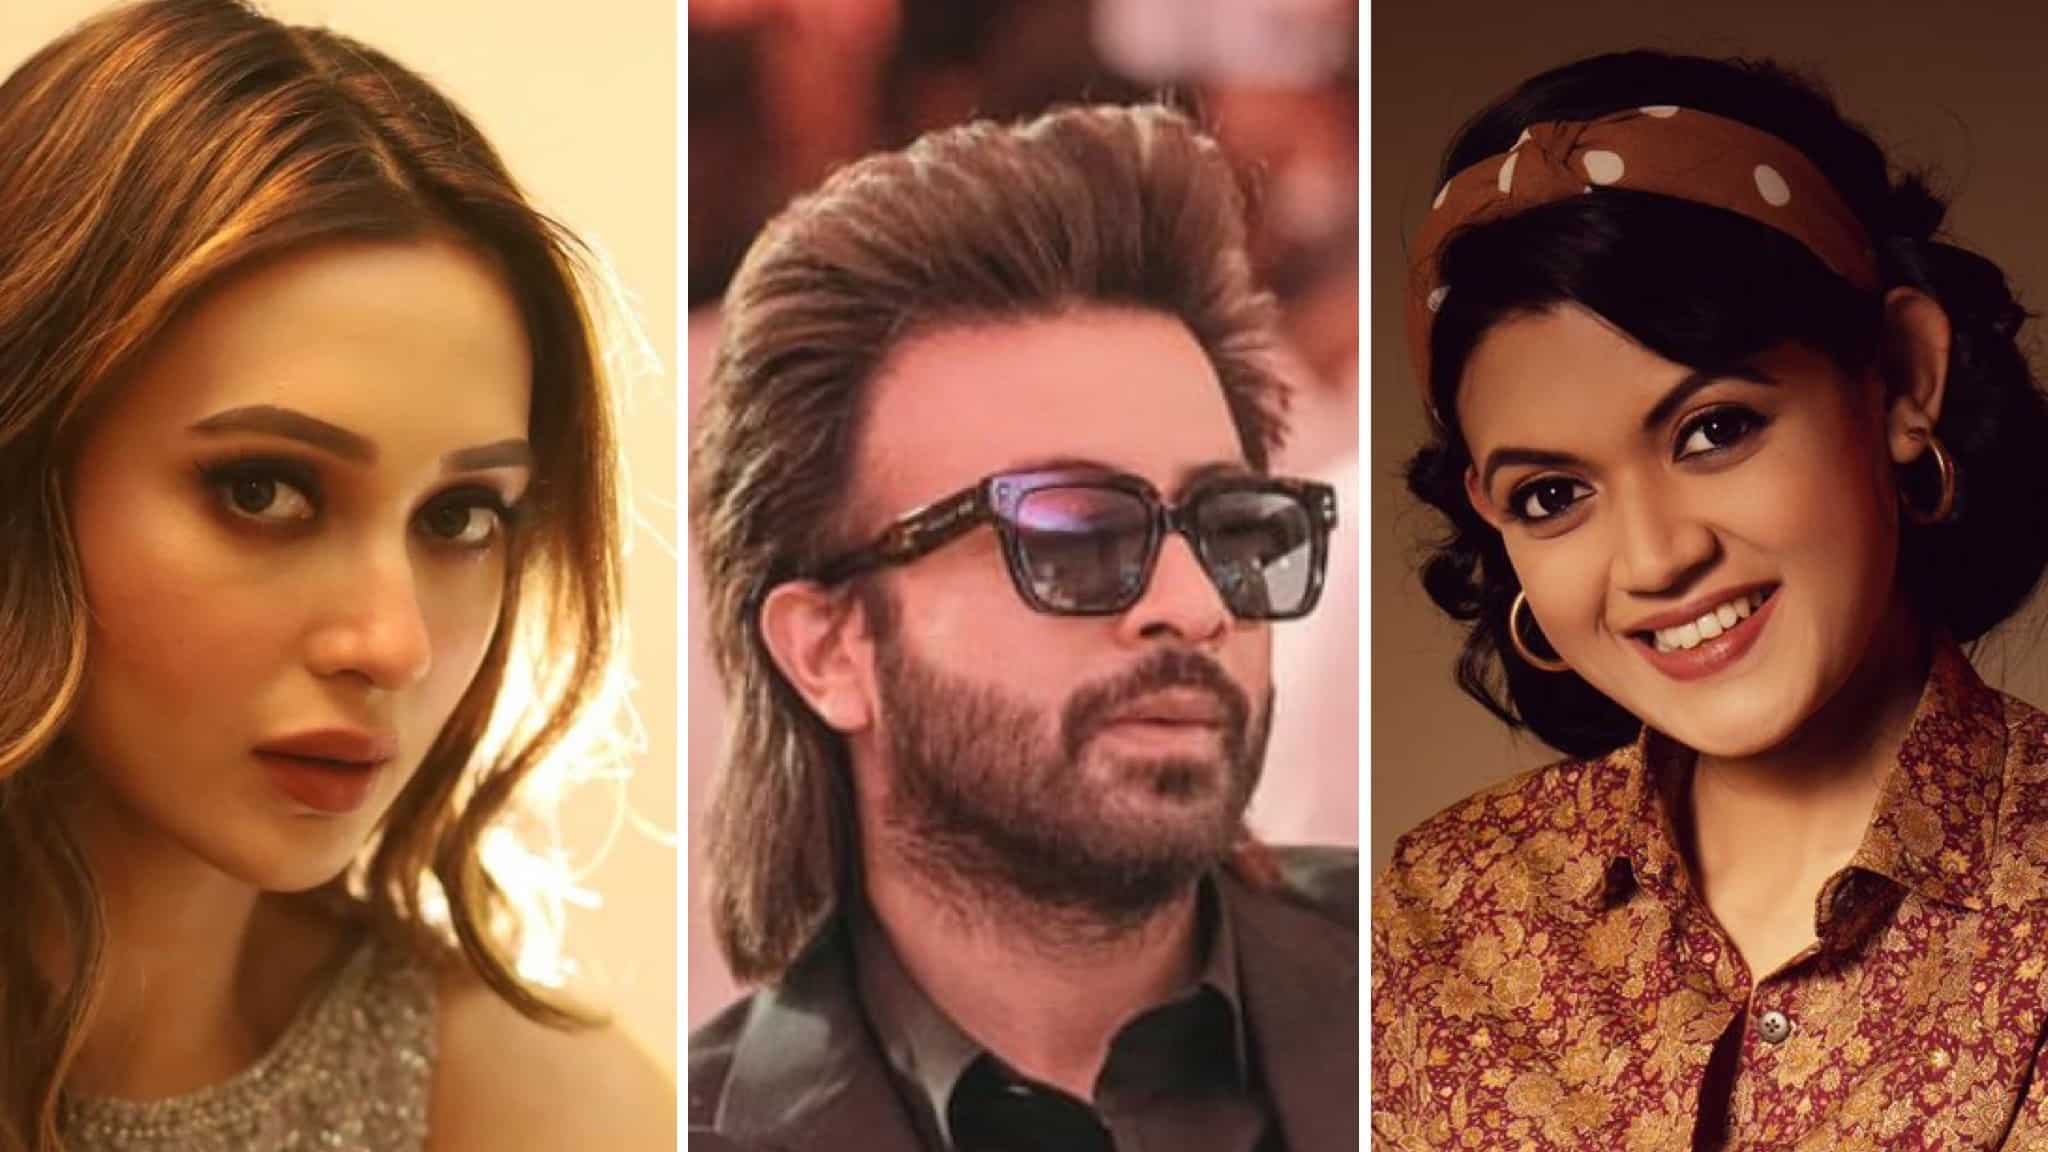 https://www.mobilemasala.com/movies/Toofan-The-first-look-of-Shakib-Khan-revealed-i227546